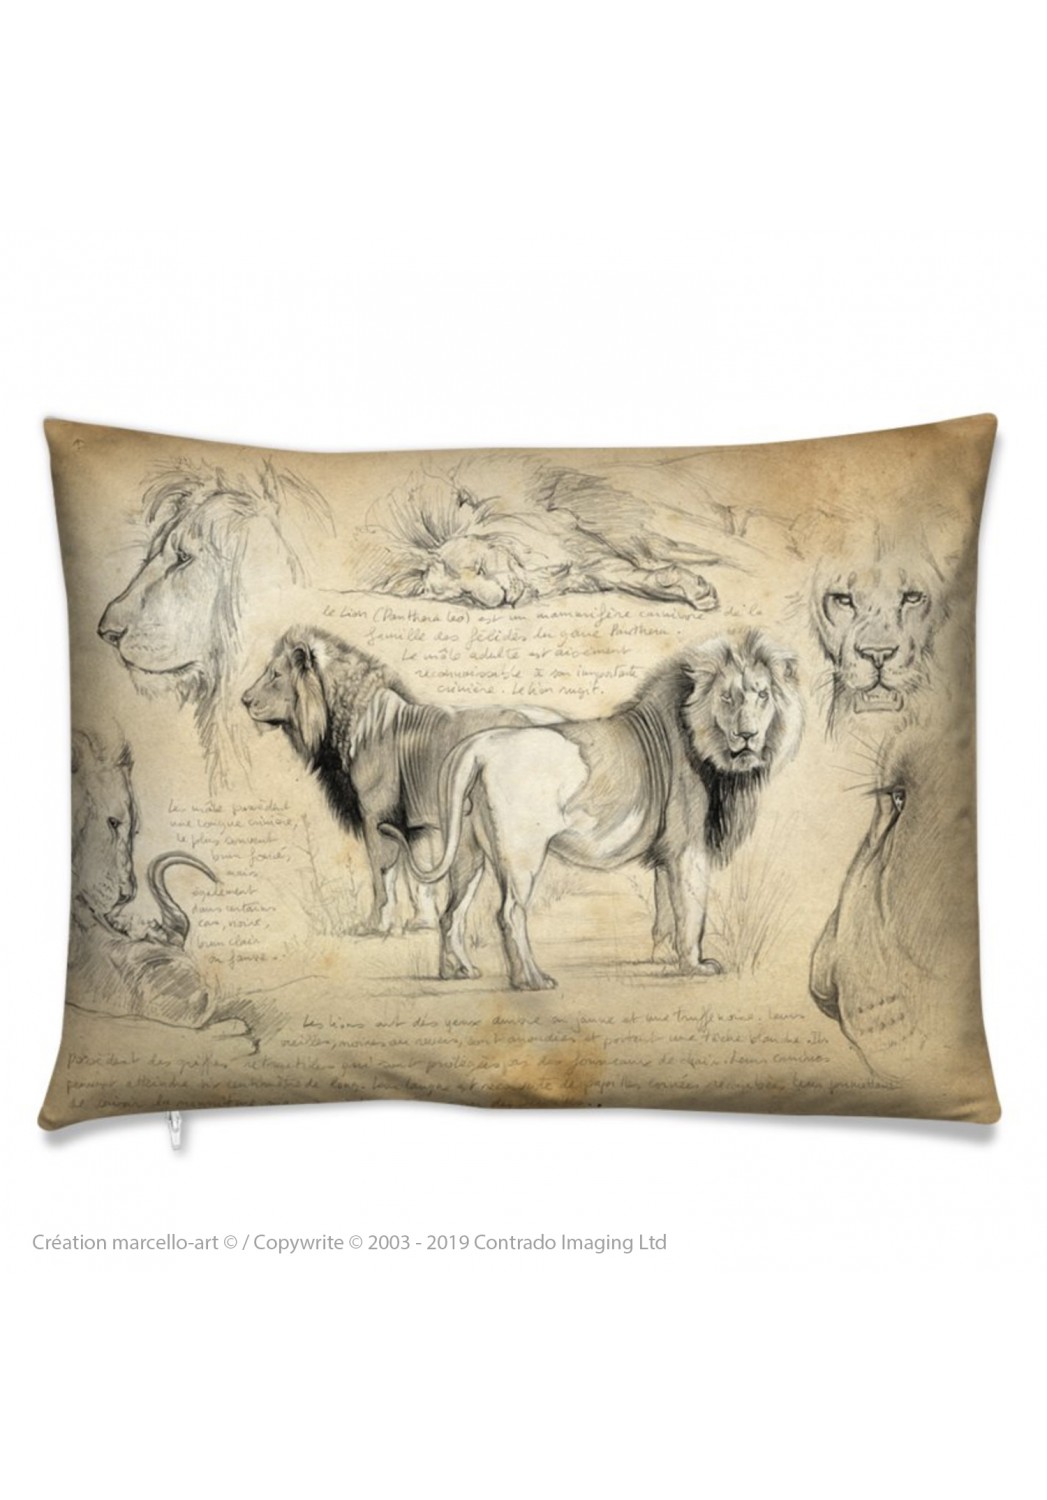 Marcello-art: Fashion accessory Cushion 54 lions brothers